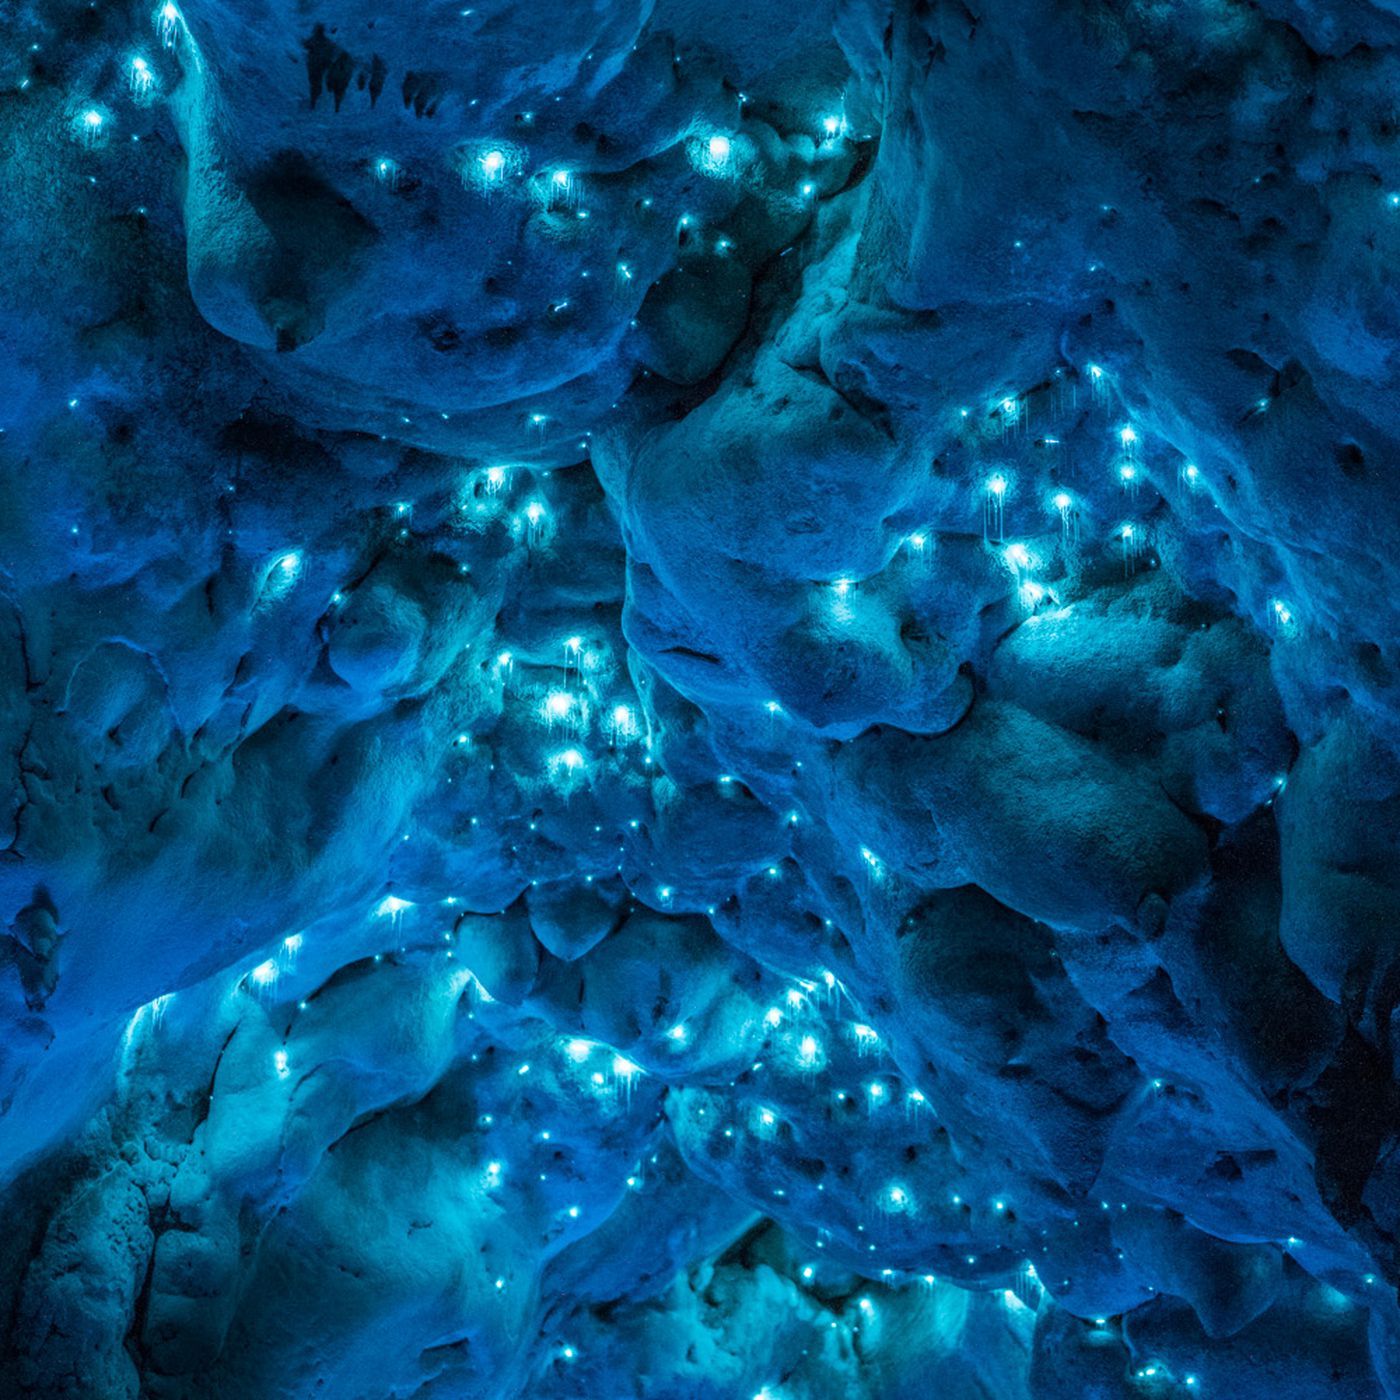 Bioluminescent Glow Worms Turn 30 Million Year Old Caves Into